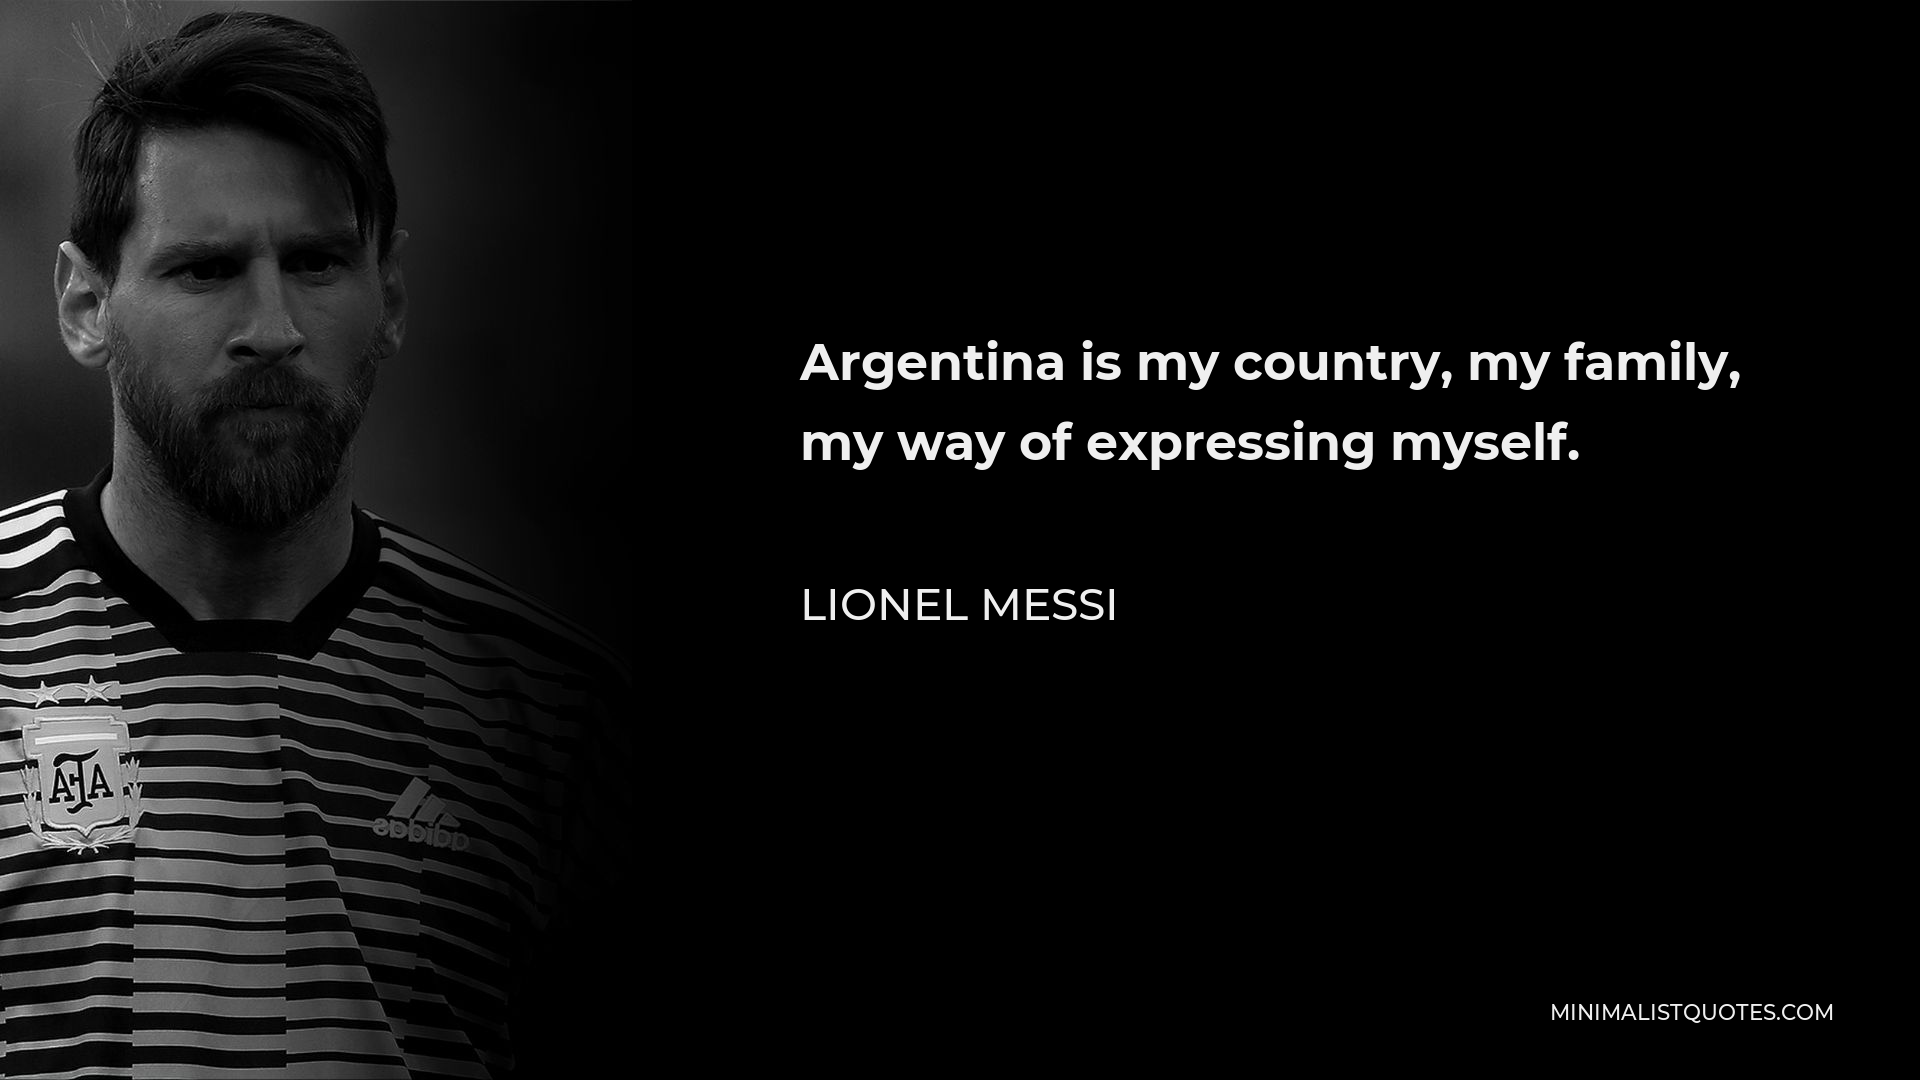 Lionel Messi Quote - Argentina is my country, my family, my way of expressing myself.